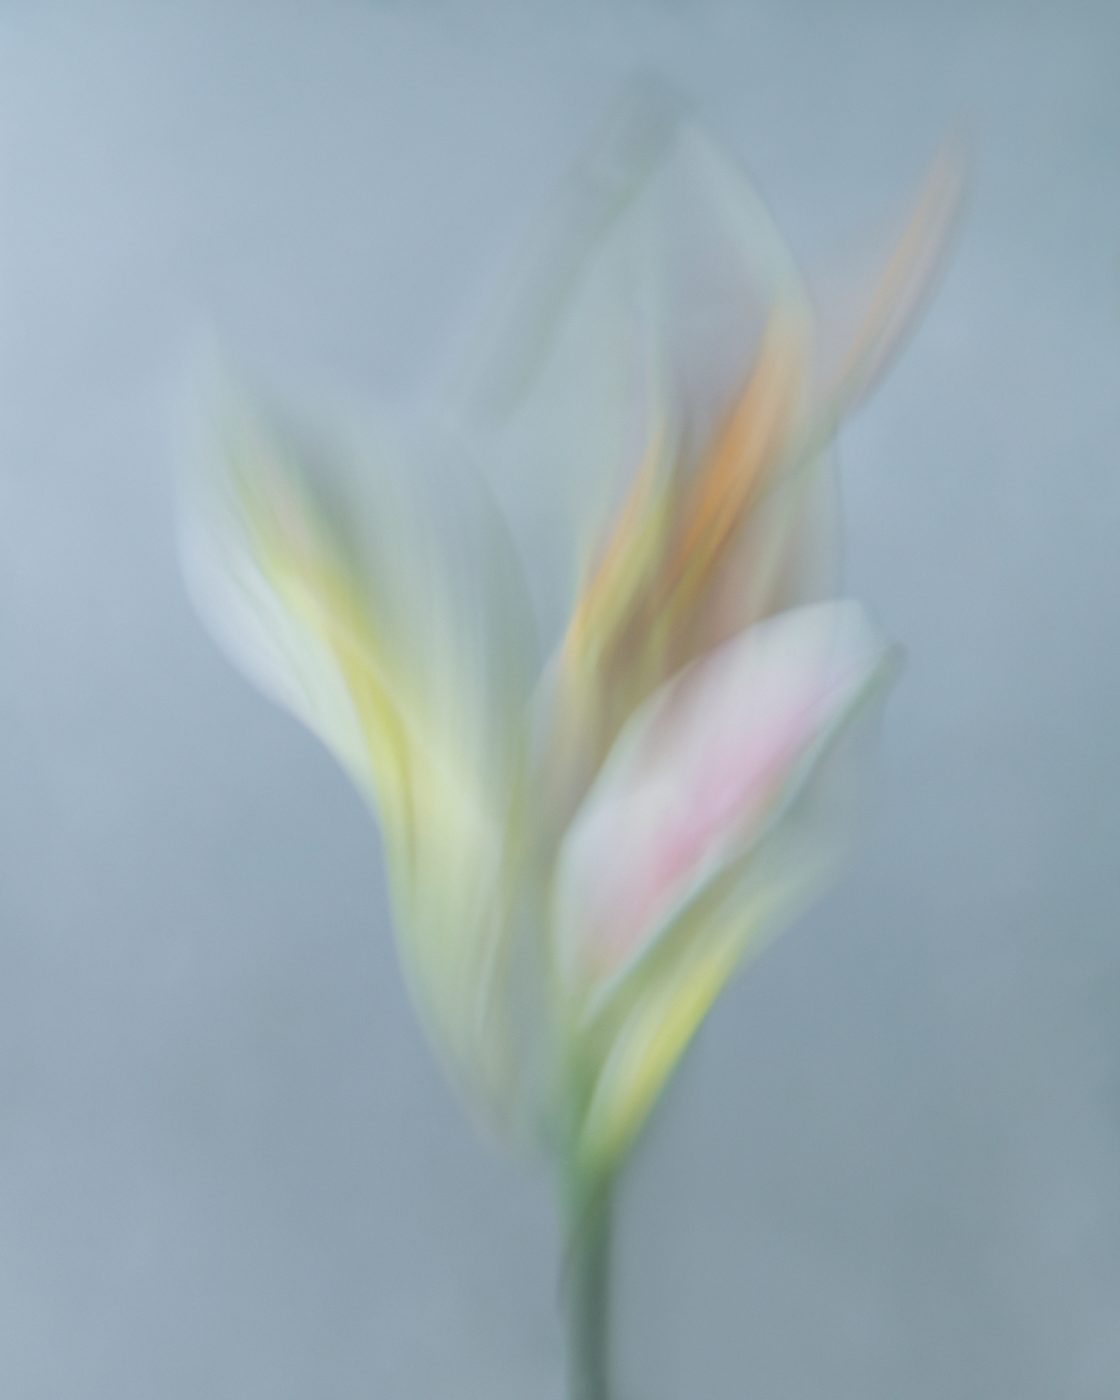 Soft and flowing image of a flower.